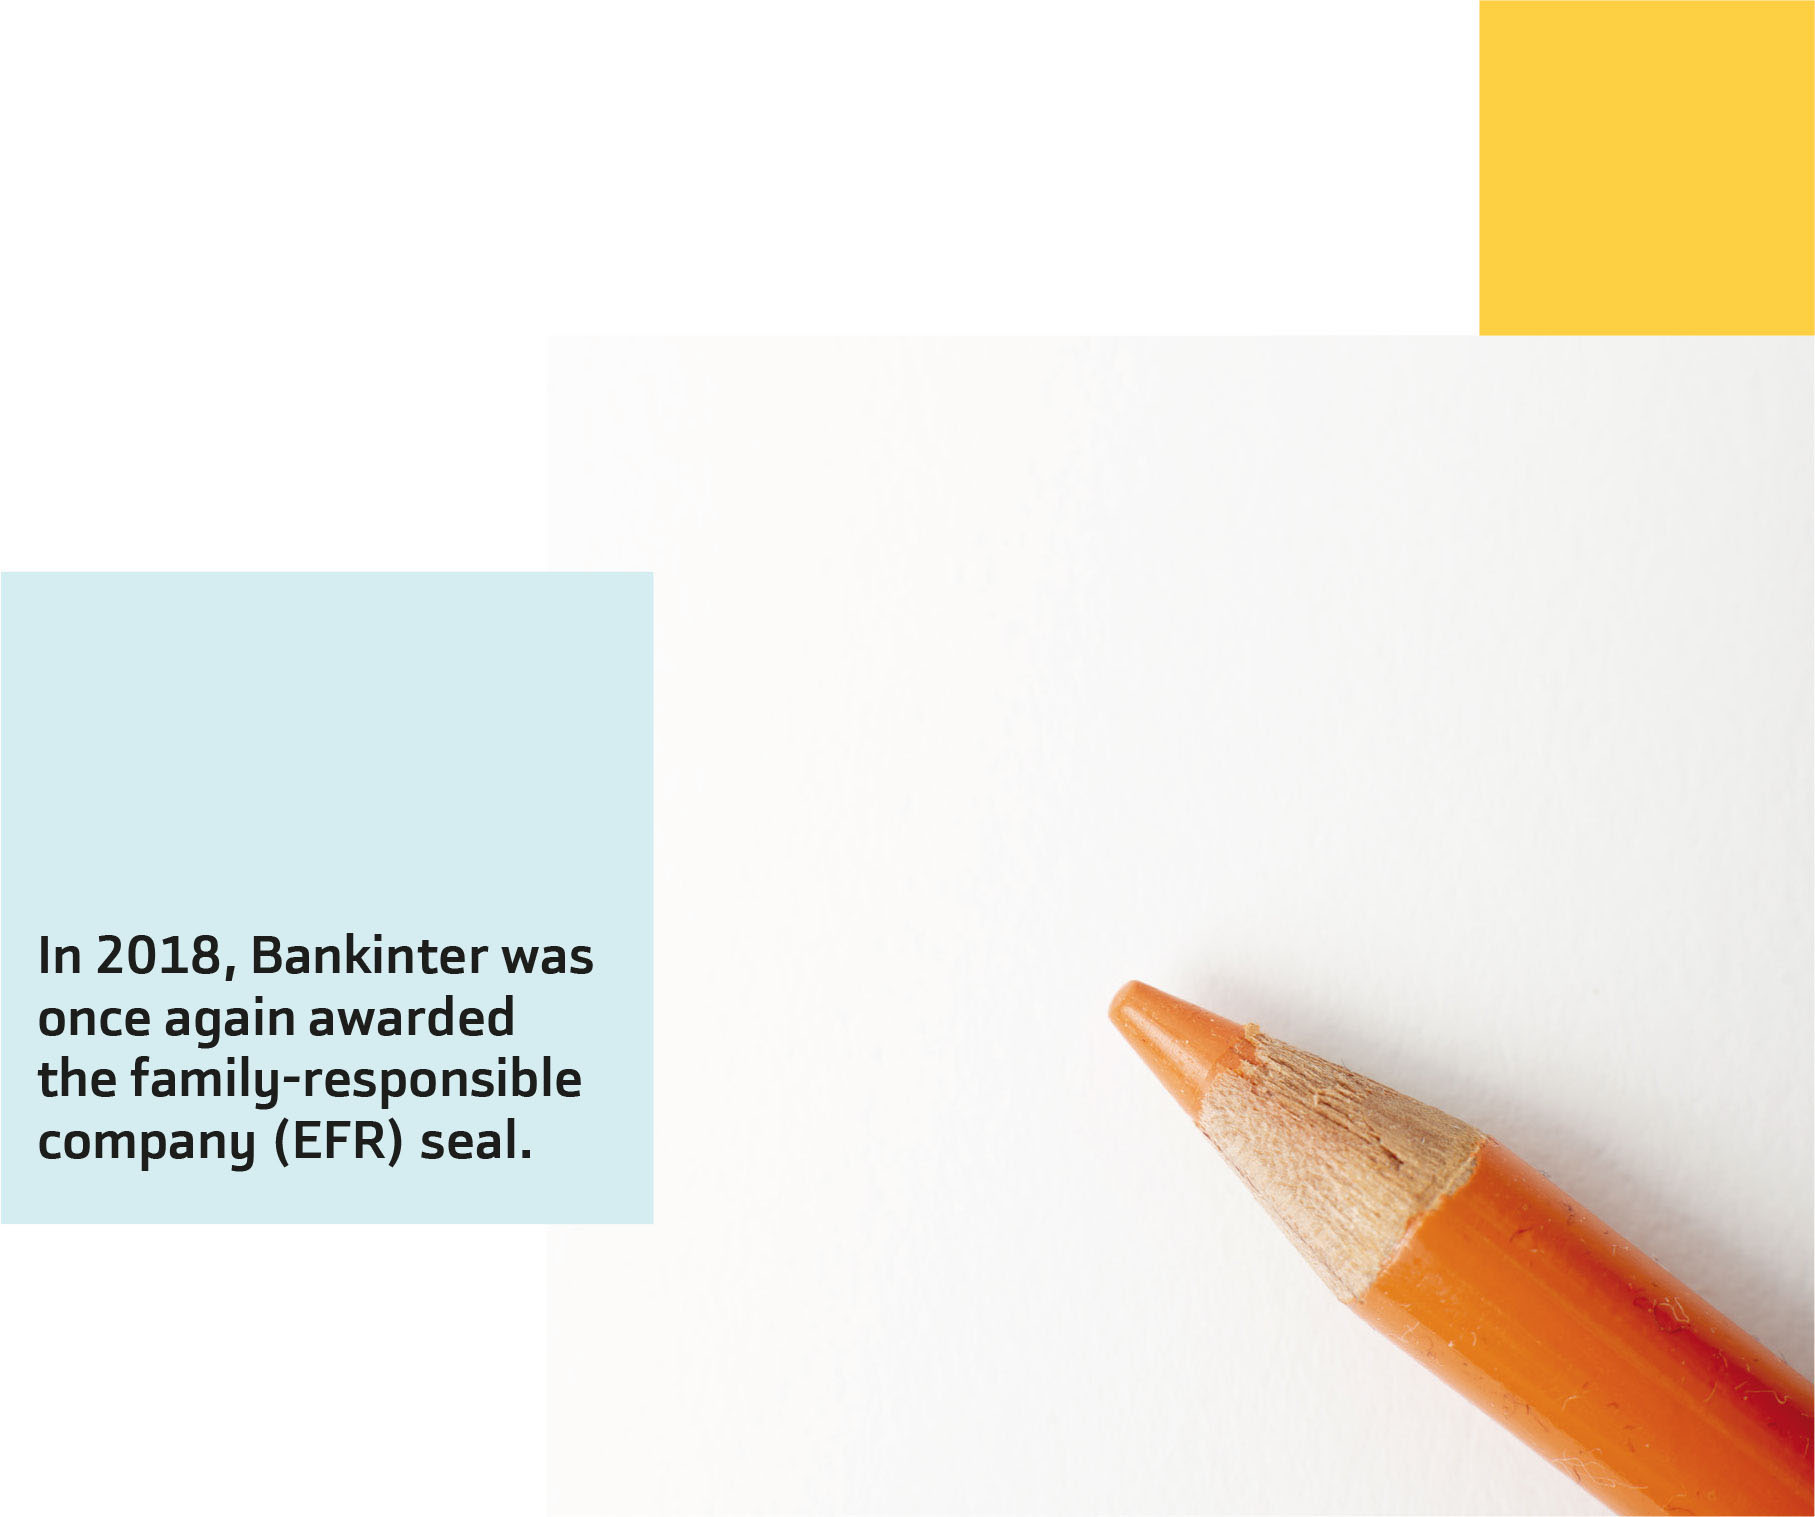 In 2018, Bankinter was once again awarded the family-responsible company (EFR) seal.